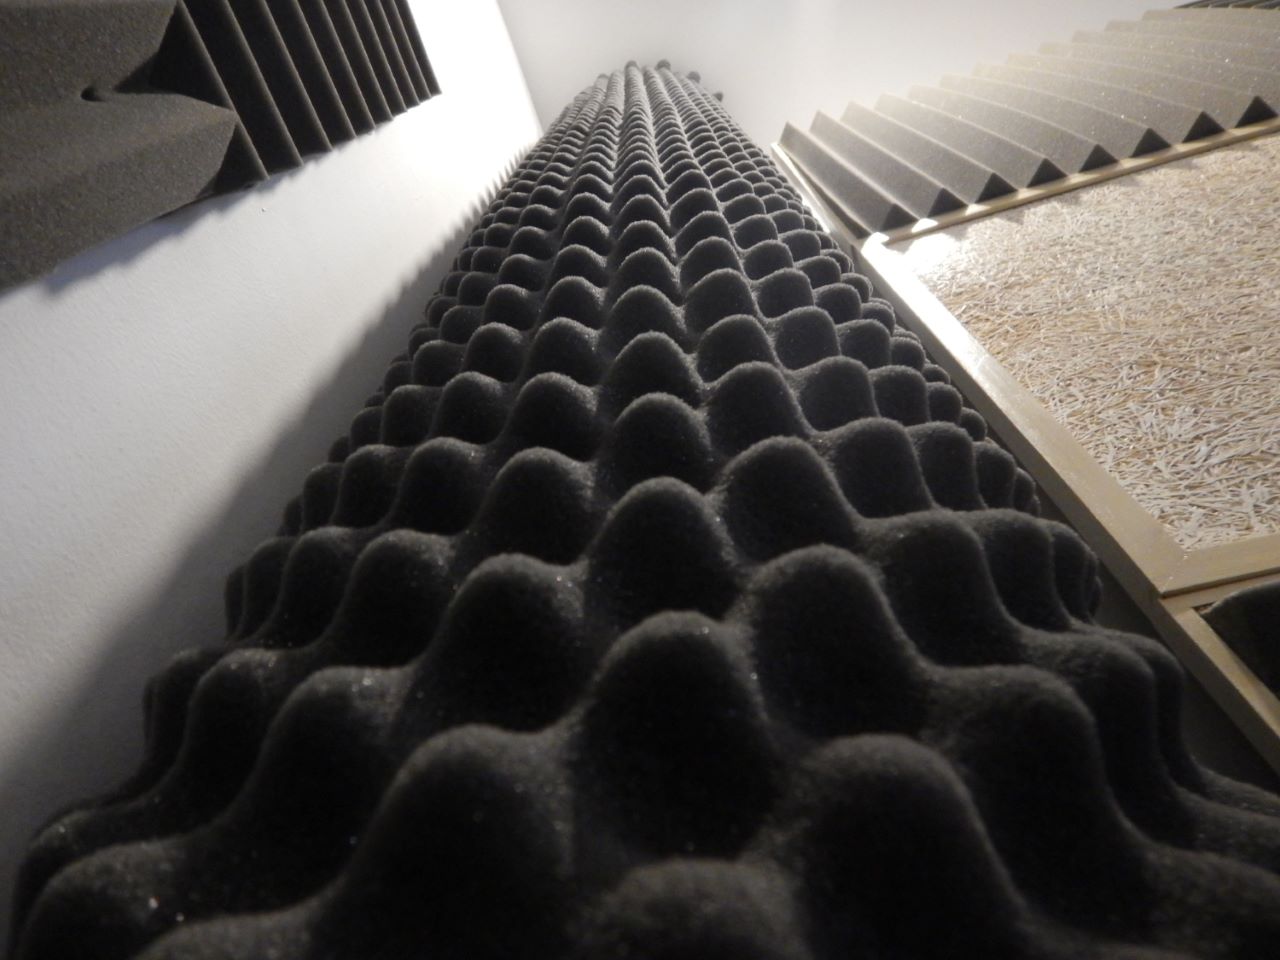 Acoustic foam, an ideal soundproof vent cover, has a distinct, porous structure, which allows it to trap sound waves.